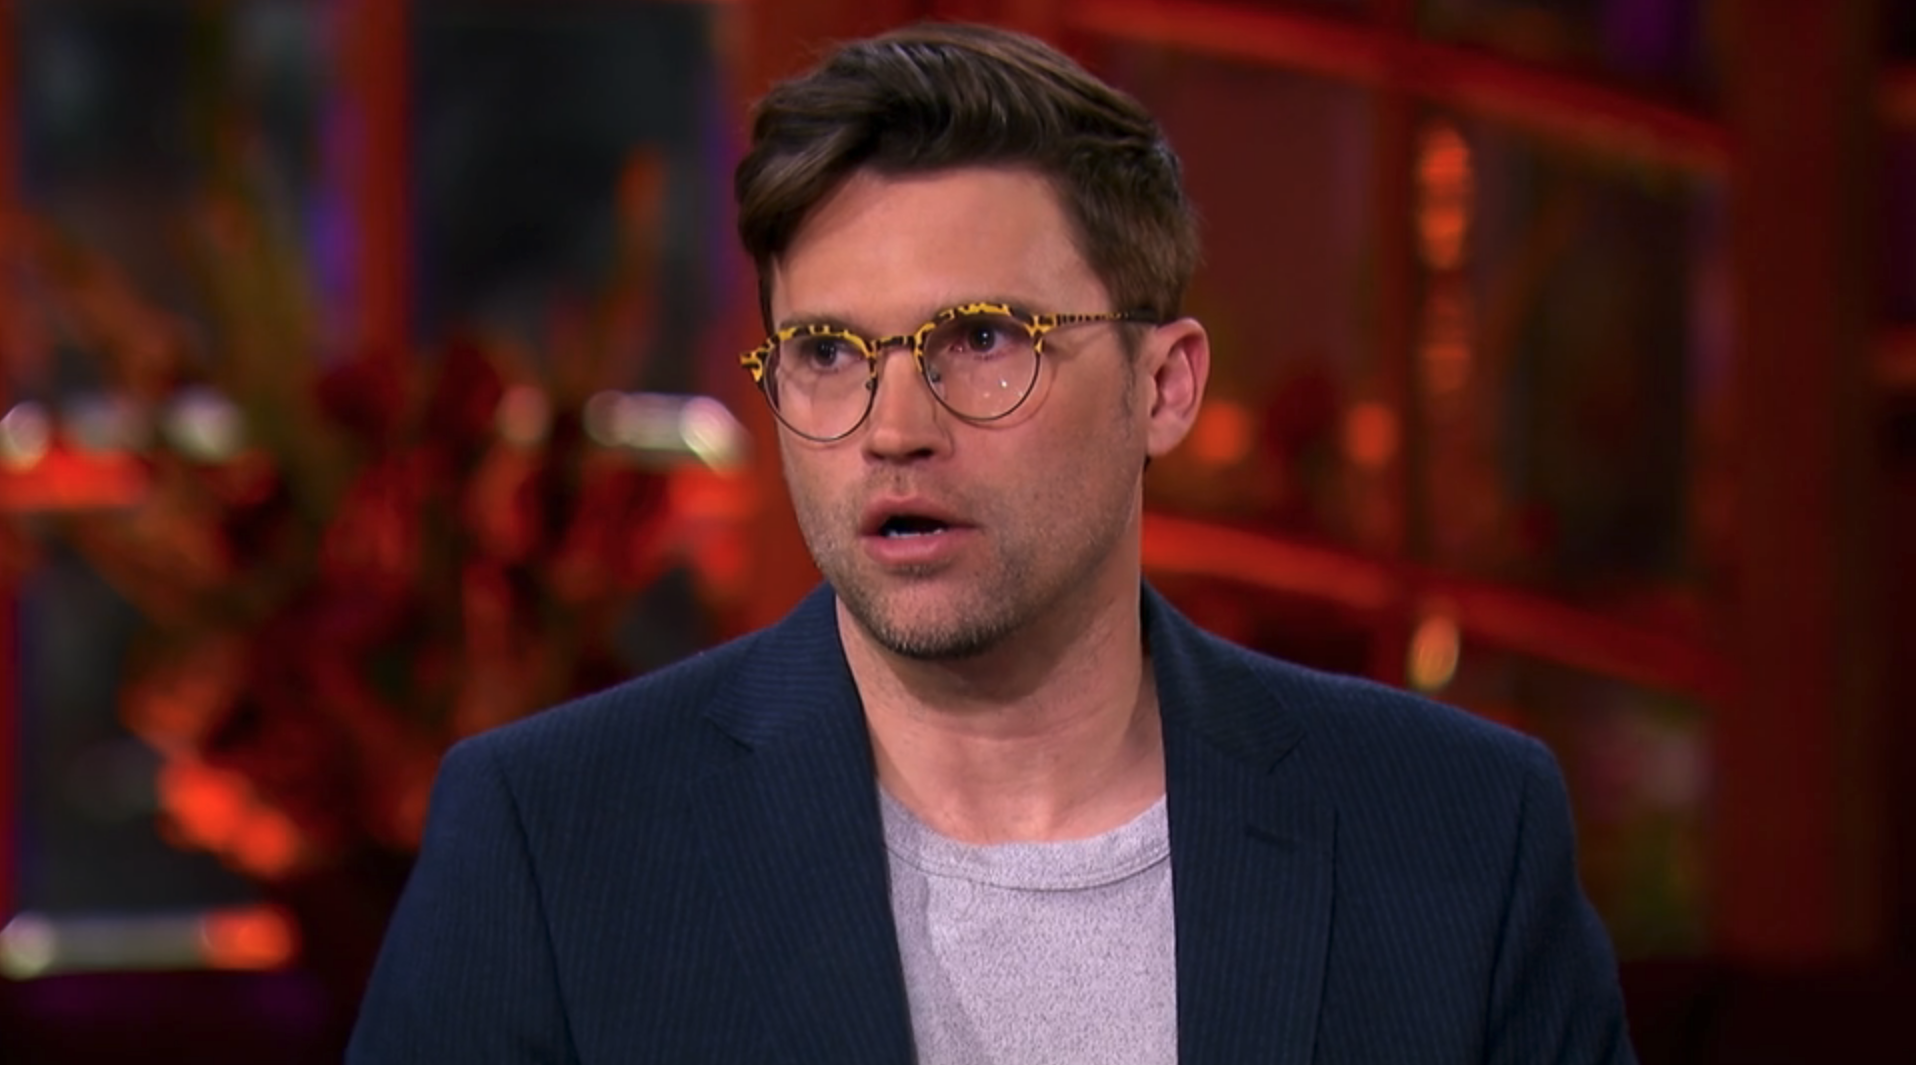 Tom wearing glasses and a blazer during the reunion